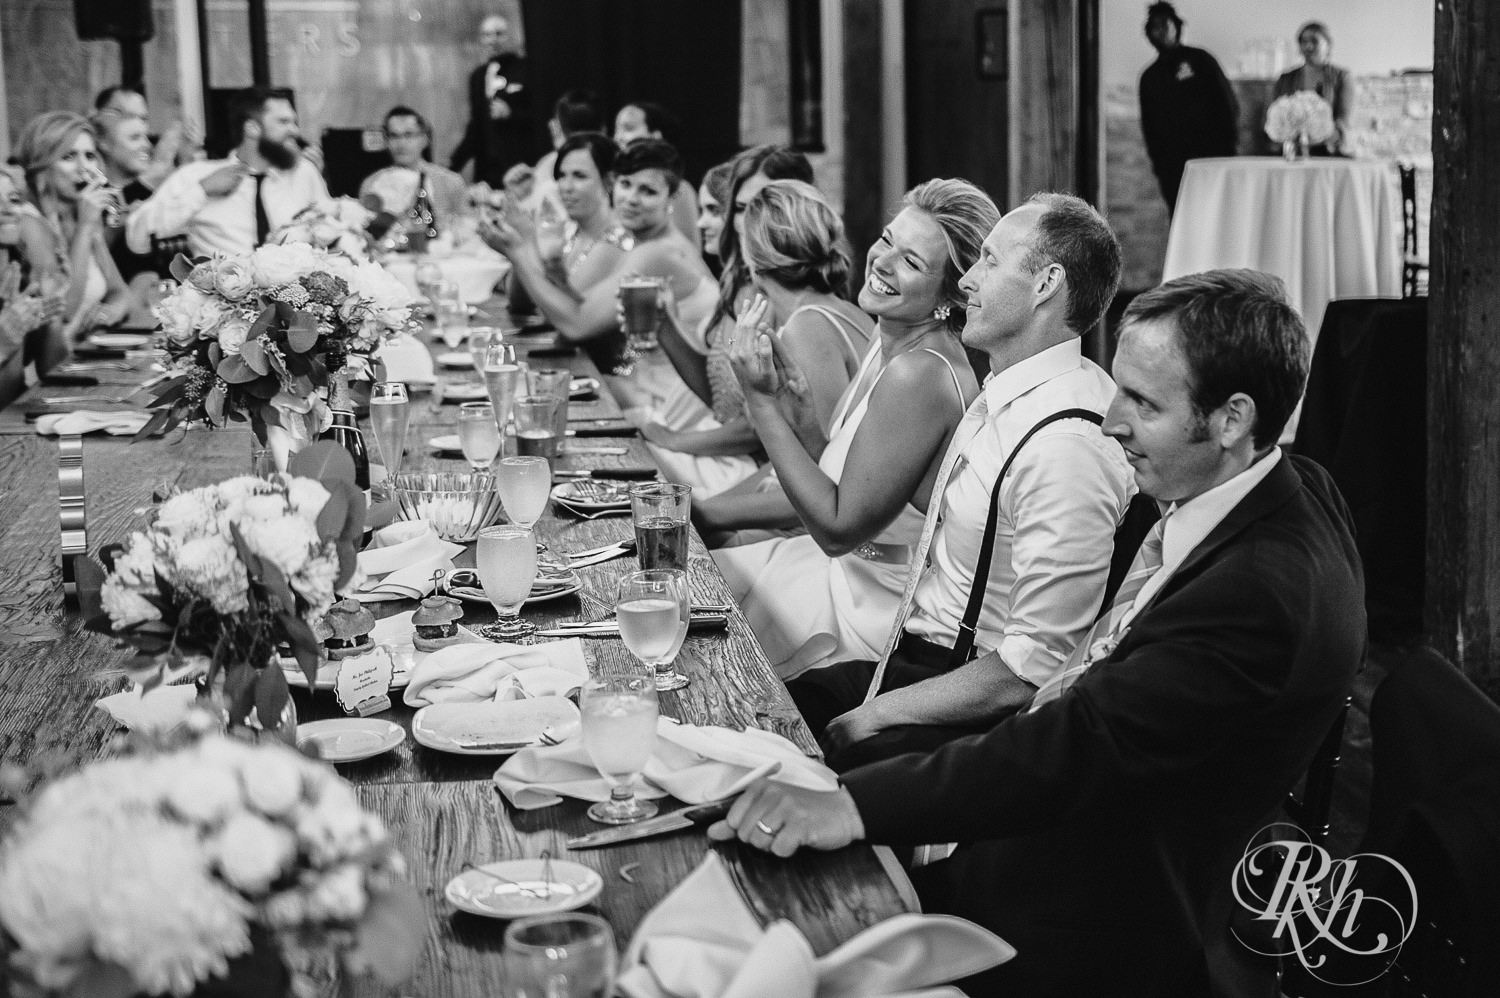 Bride and groom smile while guests give wedding speeches at Minneapolis Event Centers in Minneapolis, Minnesota.